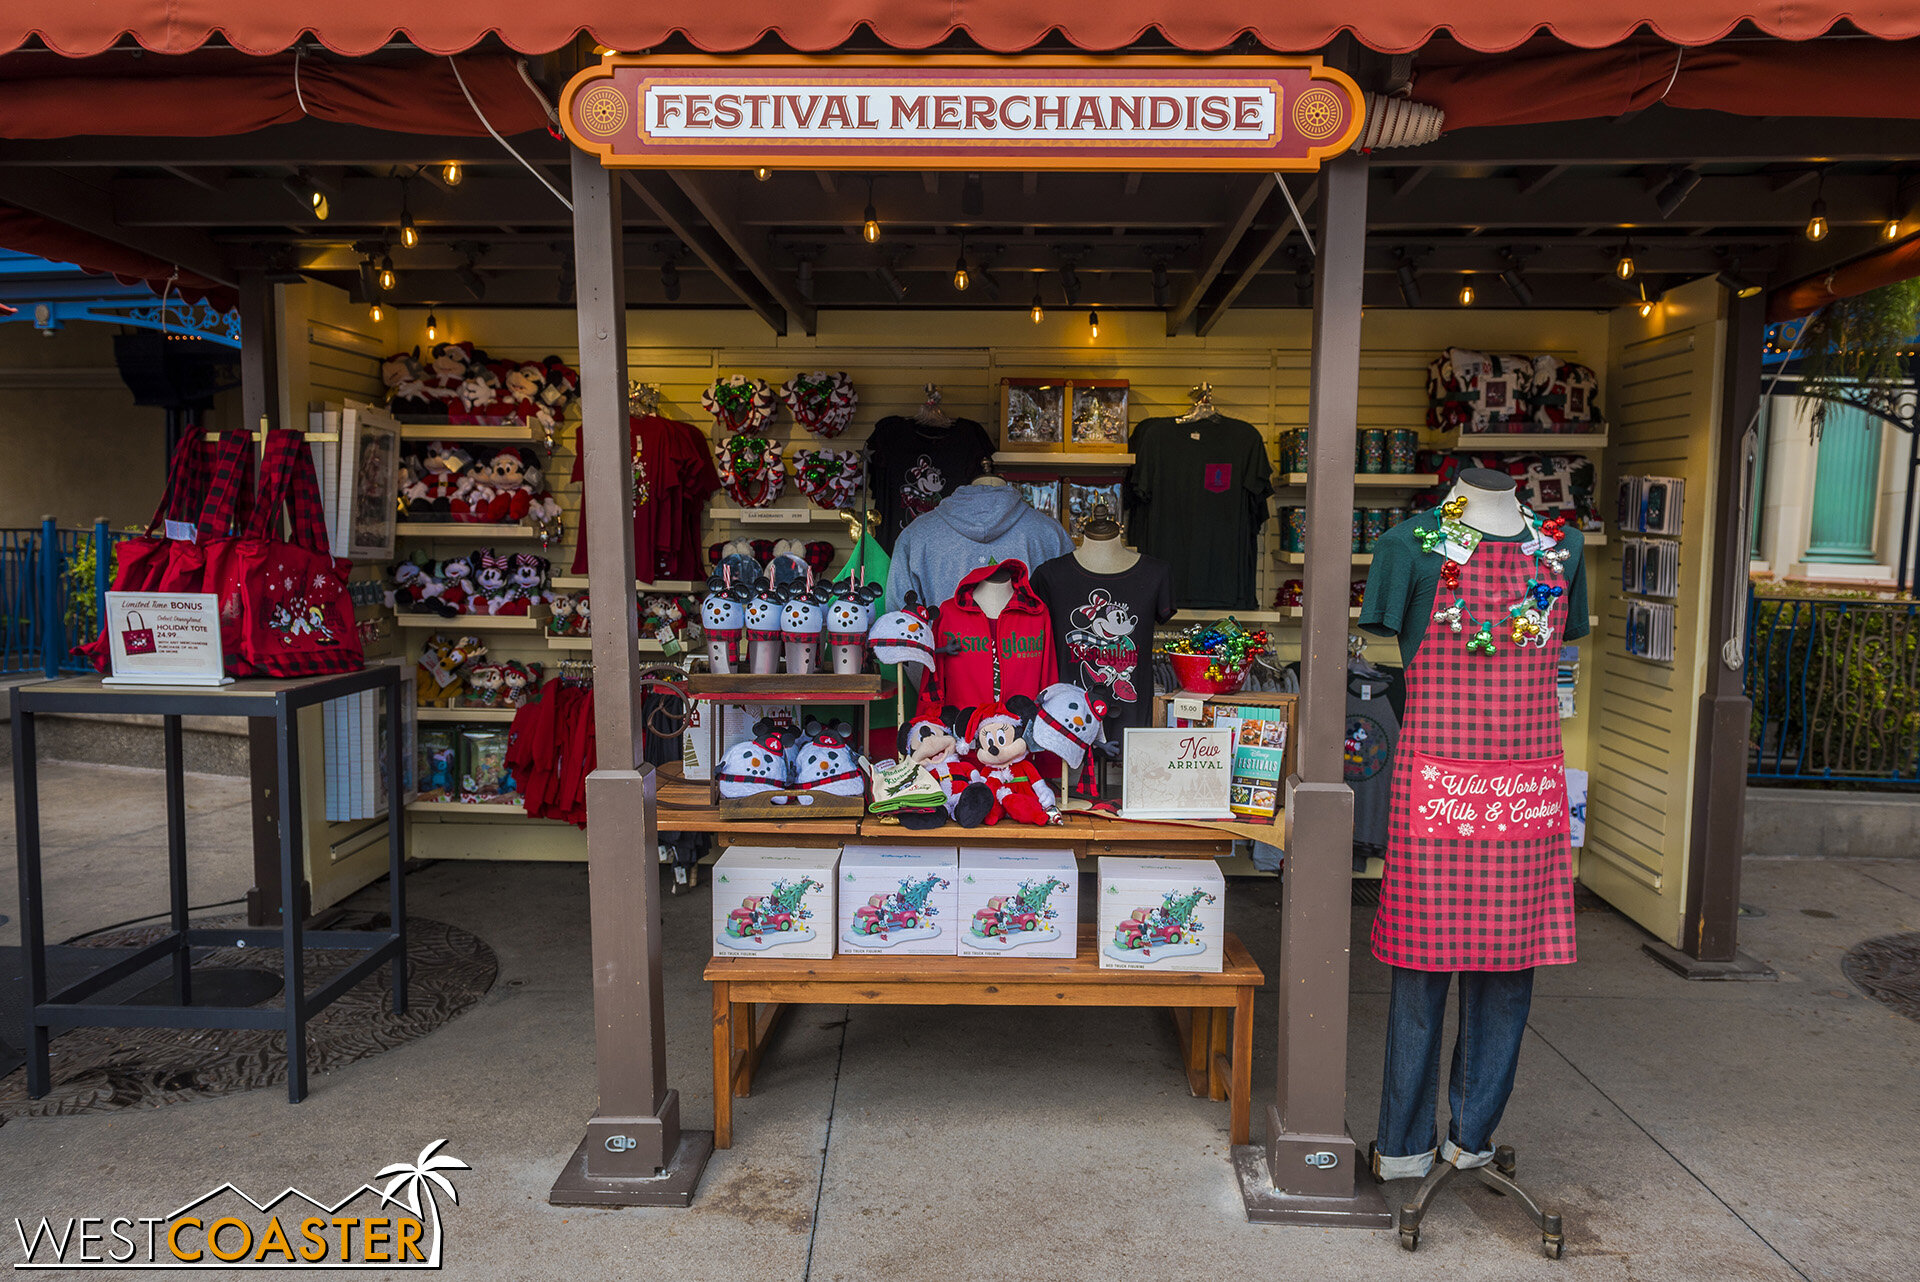  A main Festival Merchandise stand can be found near the Little Mermaid attraction. 